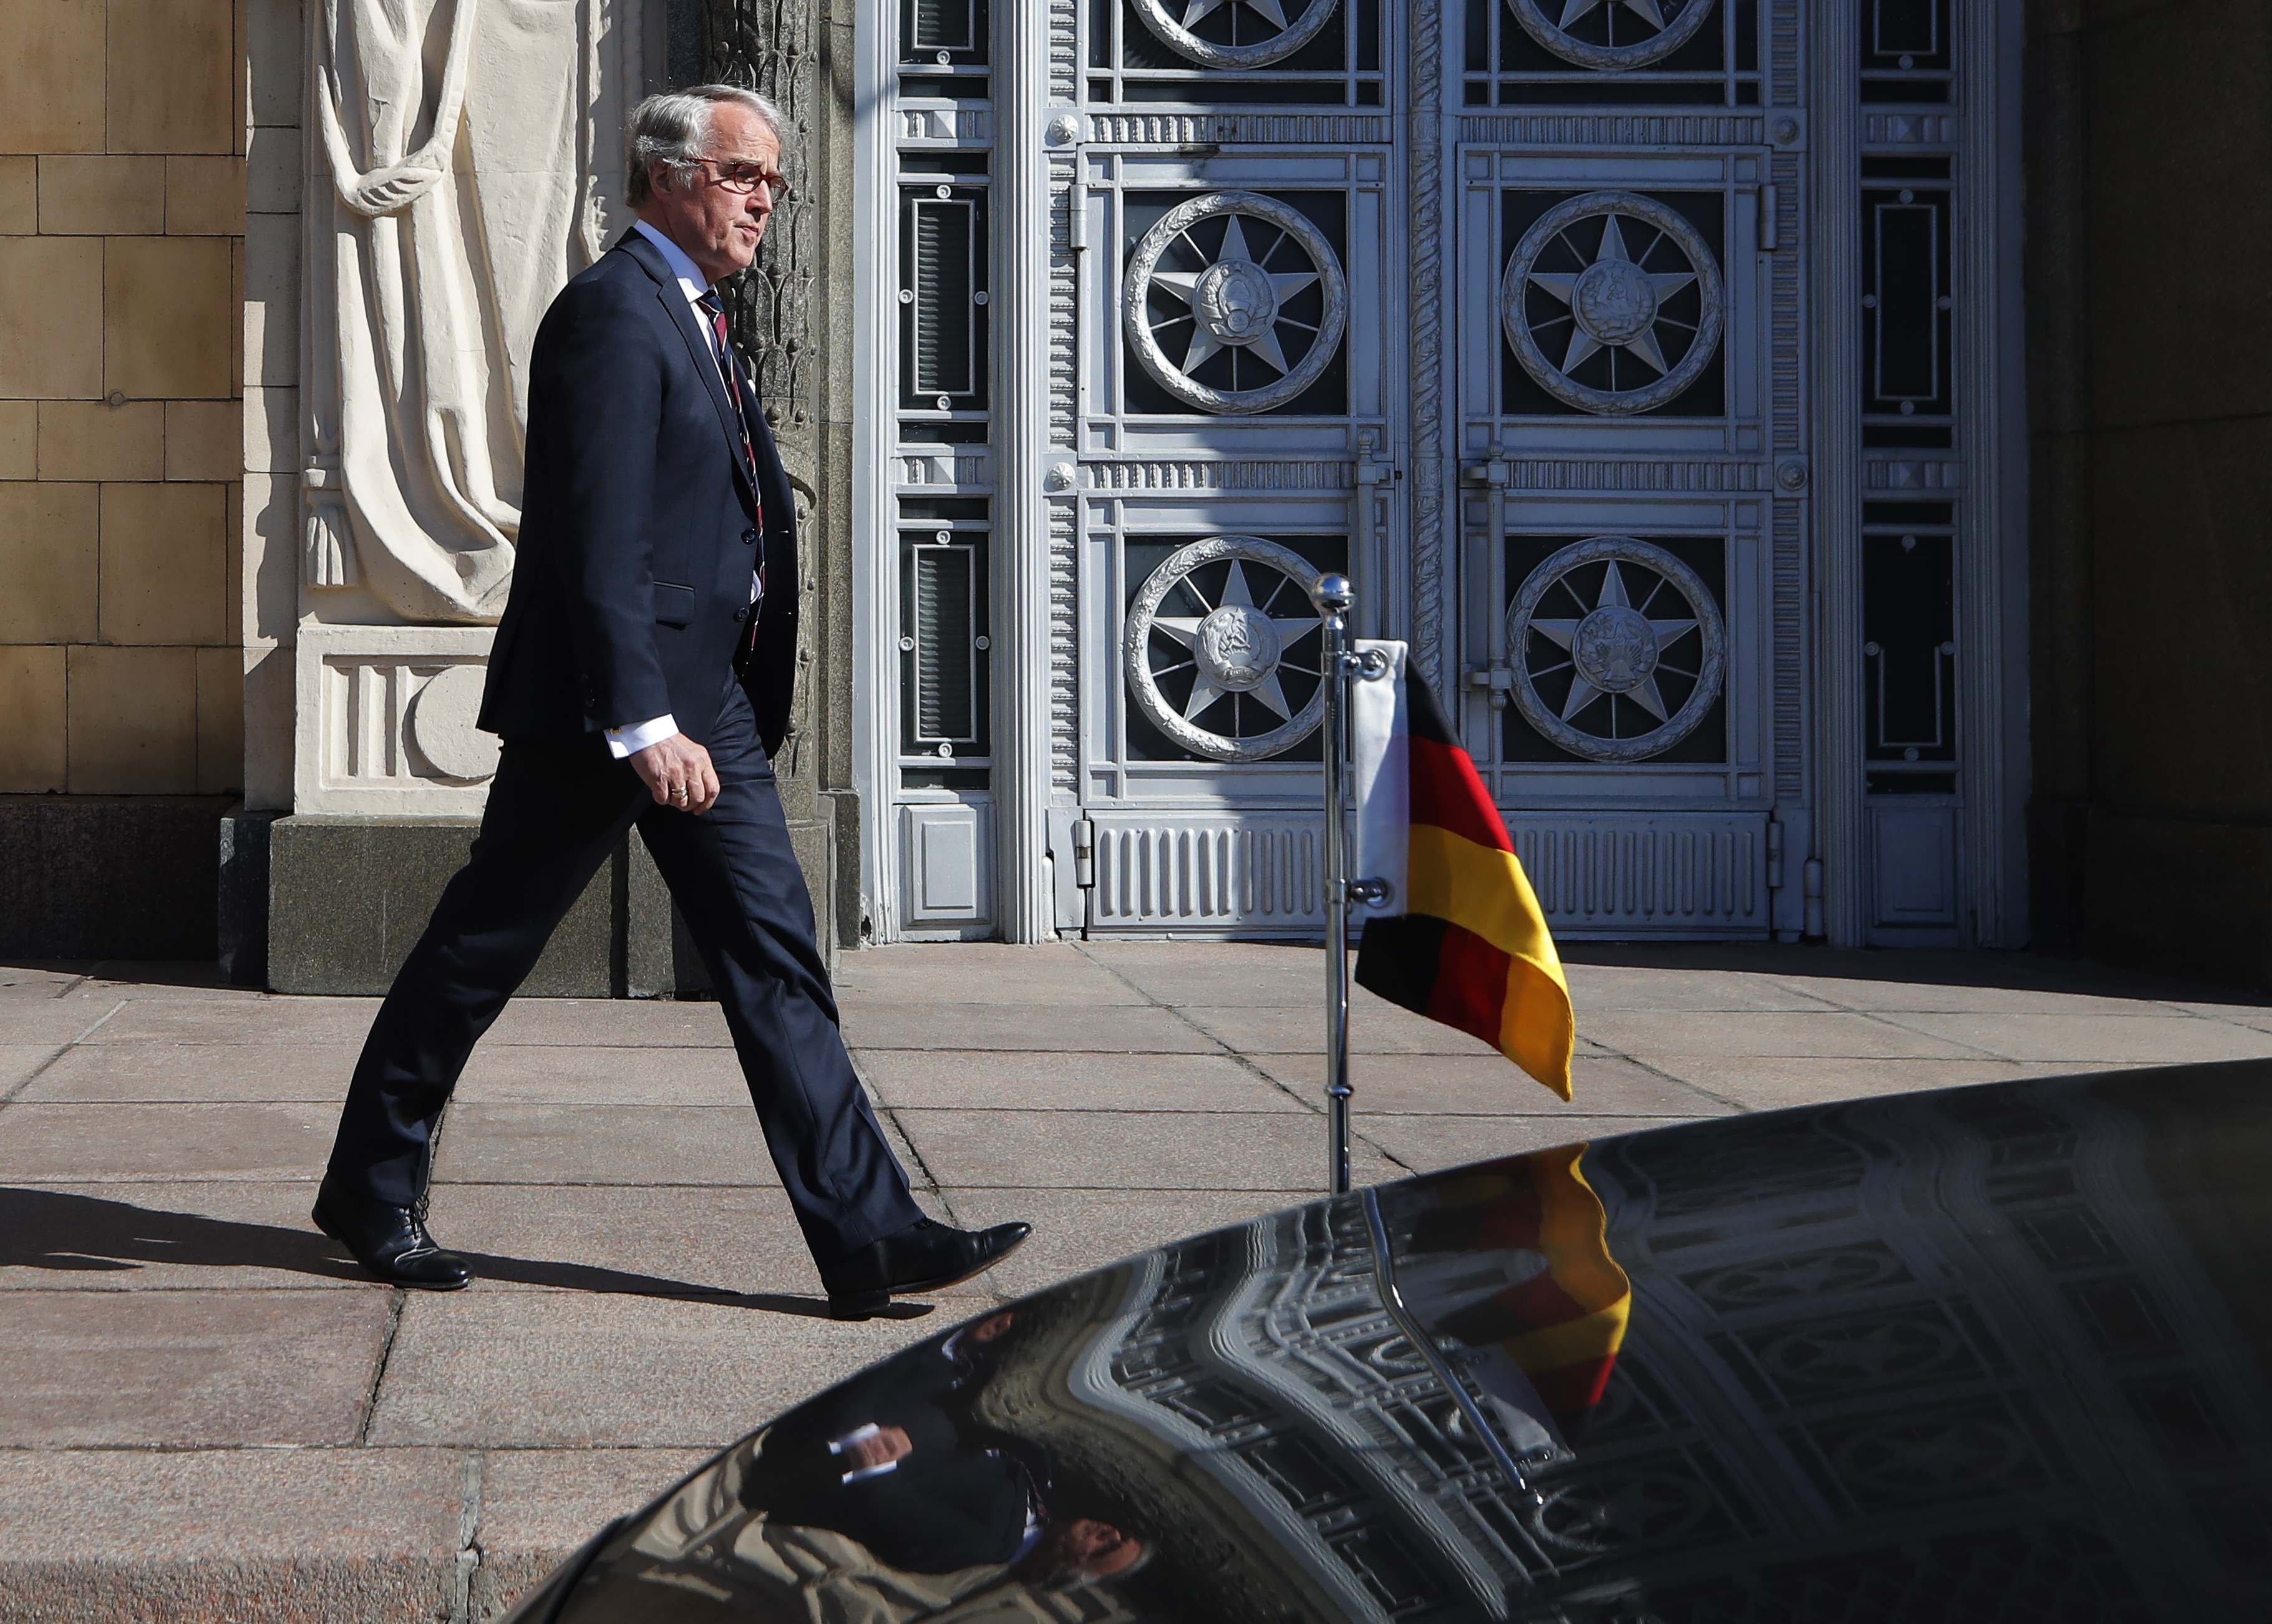 German Ambassador to Russia Ruediger von Fritsch leaves the Russian foreign ministry building in Moscow, Russia March 30, 2018. REUTERS/Maxim Shemetov